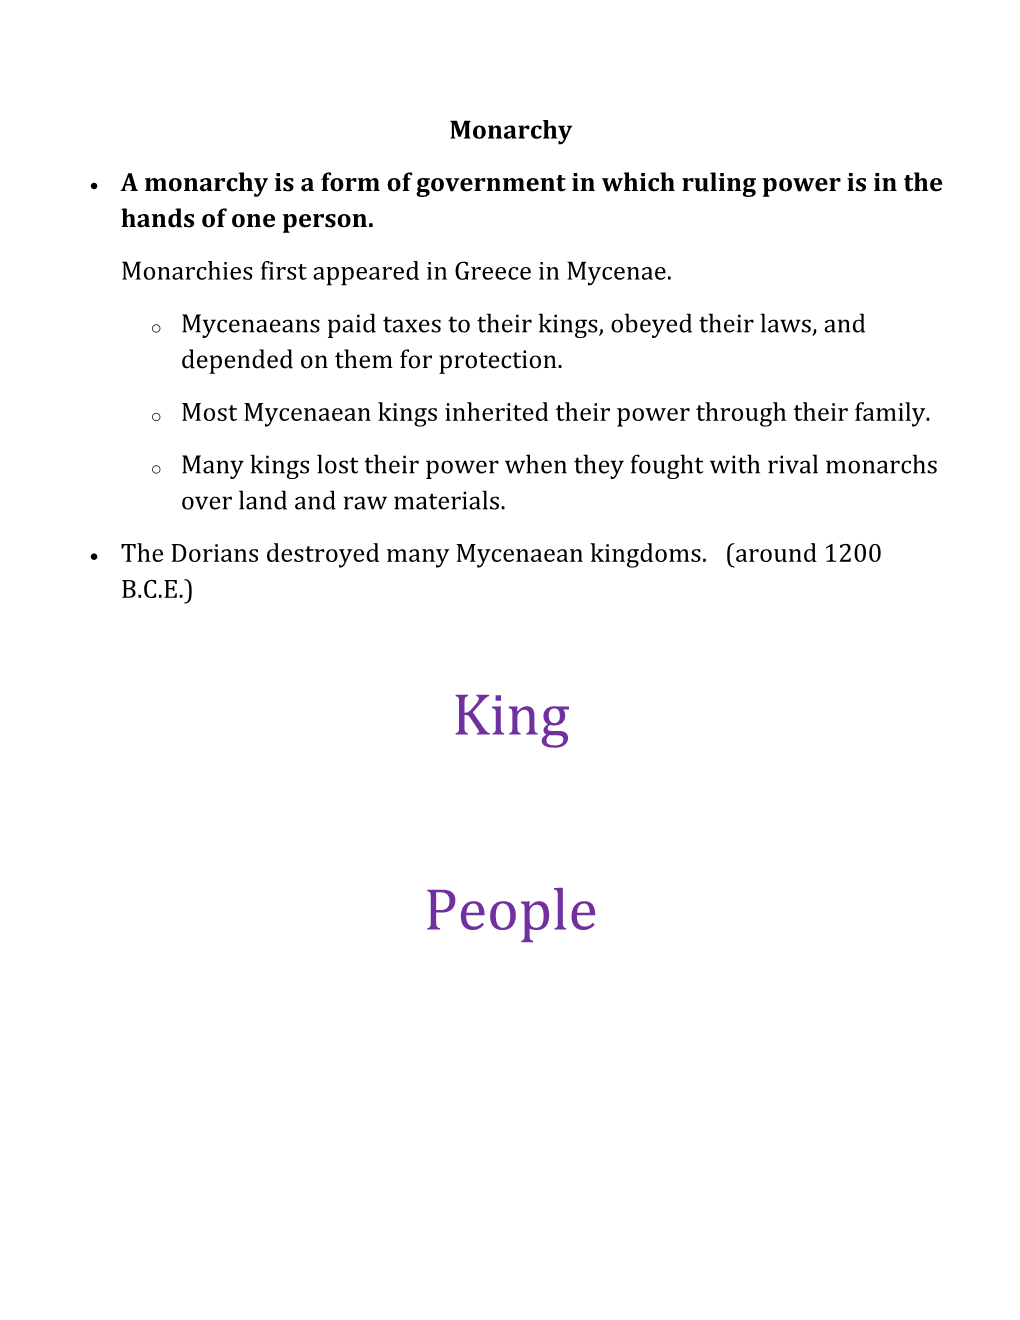 A Monarchy Is a Form of Government in Which Ruling Power Is in the Hands of One Person